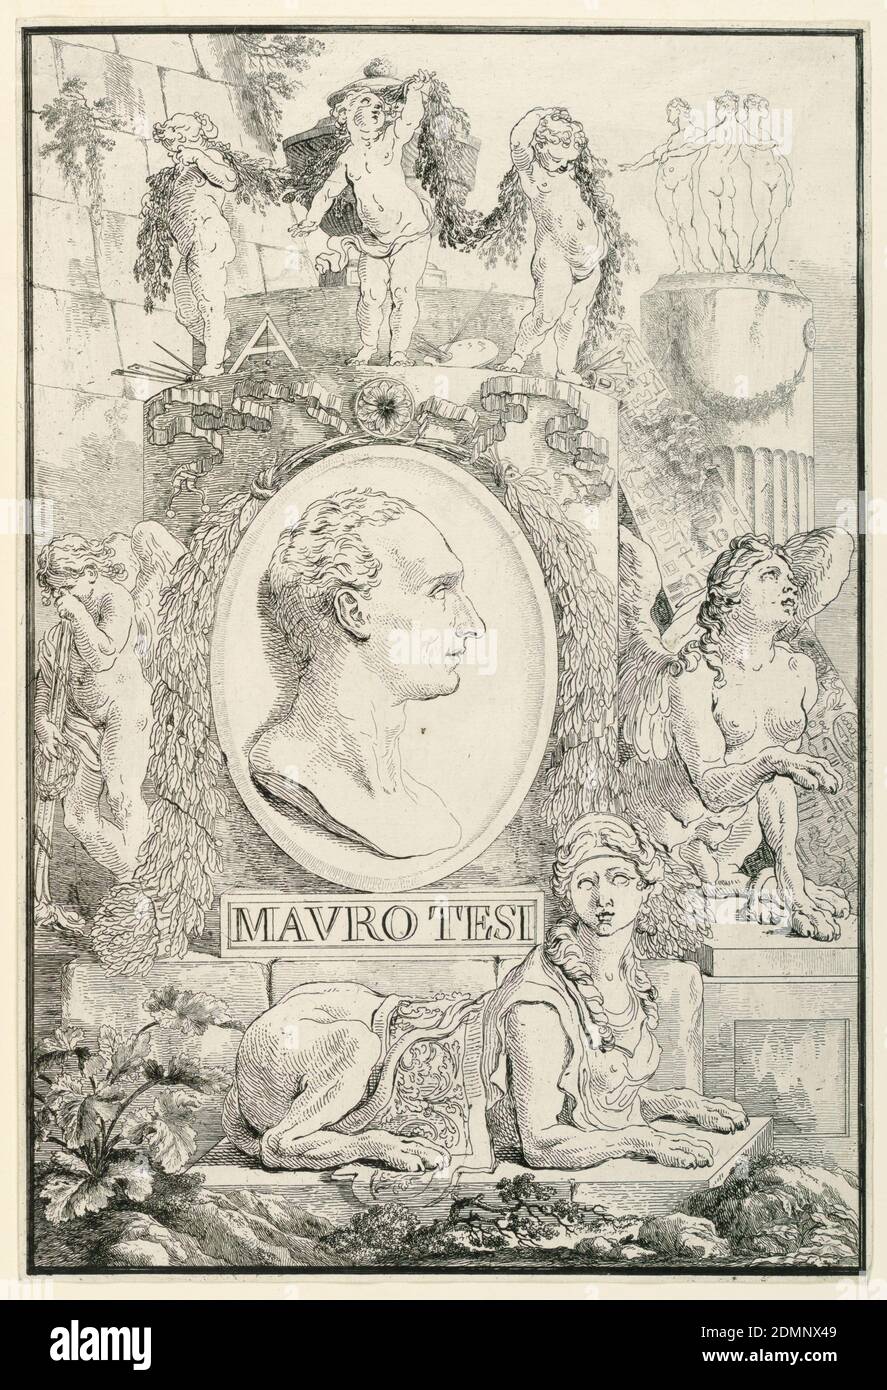 Portrait of Mauro Tesi in a medallion, surrounded by architectural elements, Count Cesare Massimiliano Gini, Italian, 1739 - 1821, etching on laid paper, Europe, 1787, Print Stock Photo